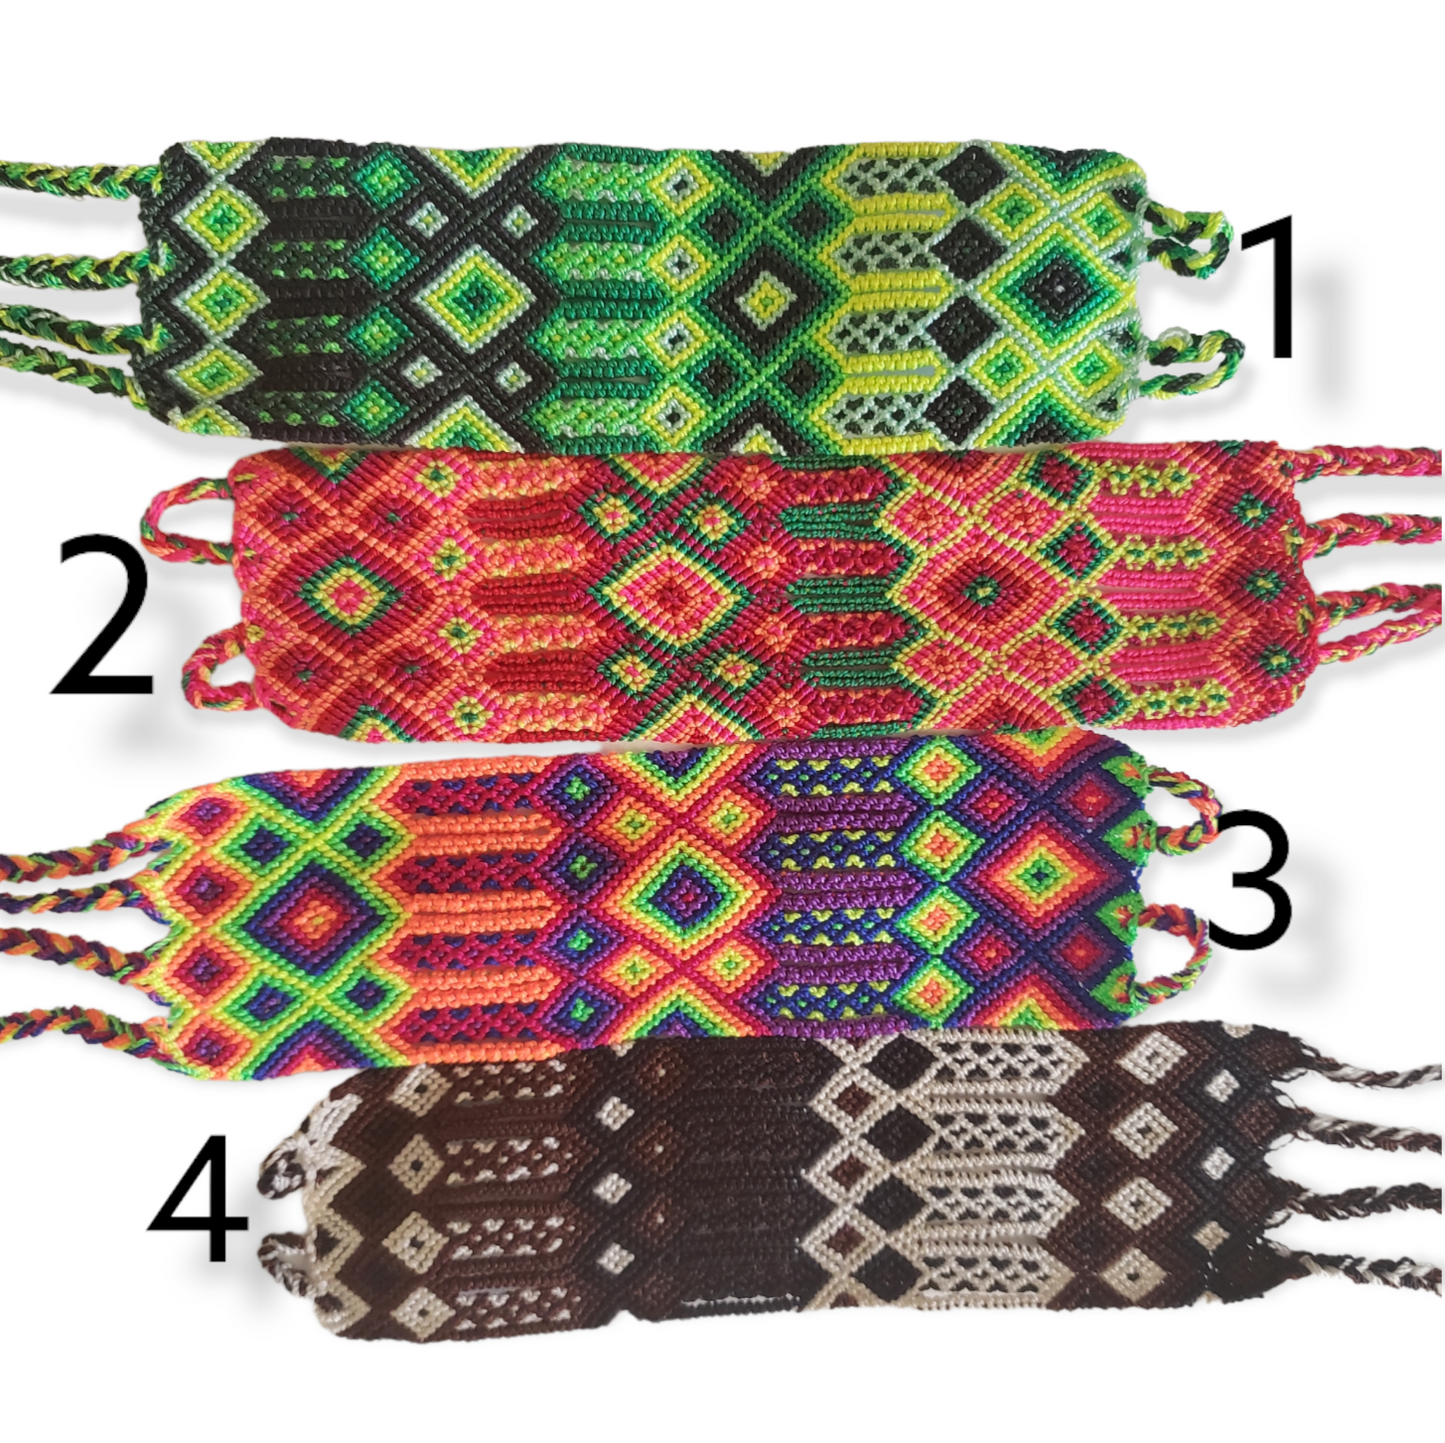 Embroidered Mexican Woven Friendship Bracelets - Long